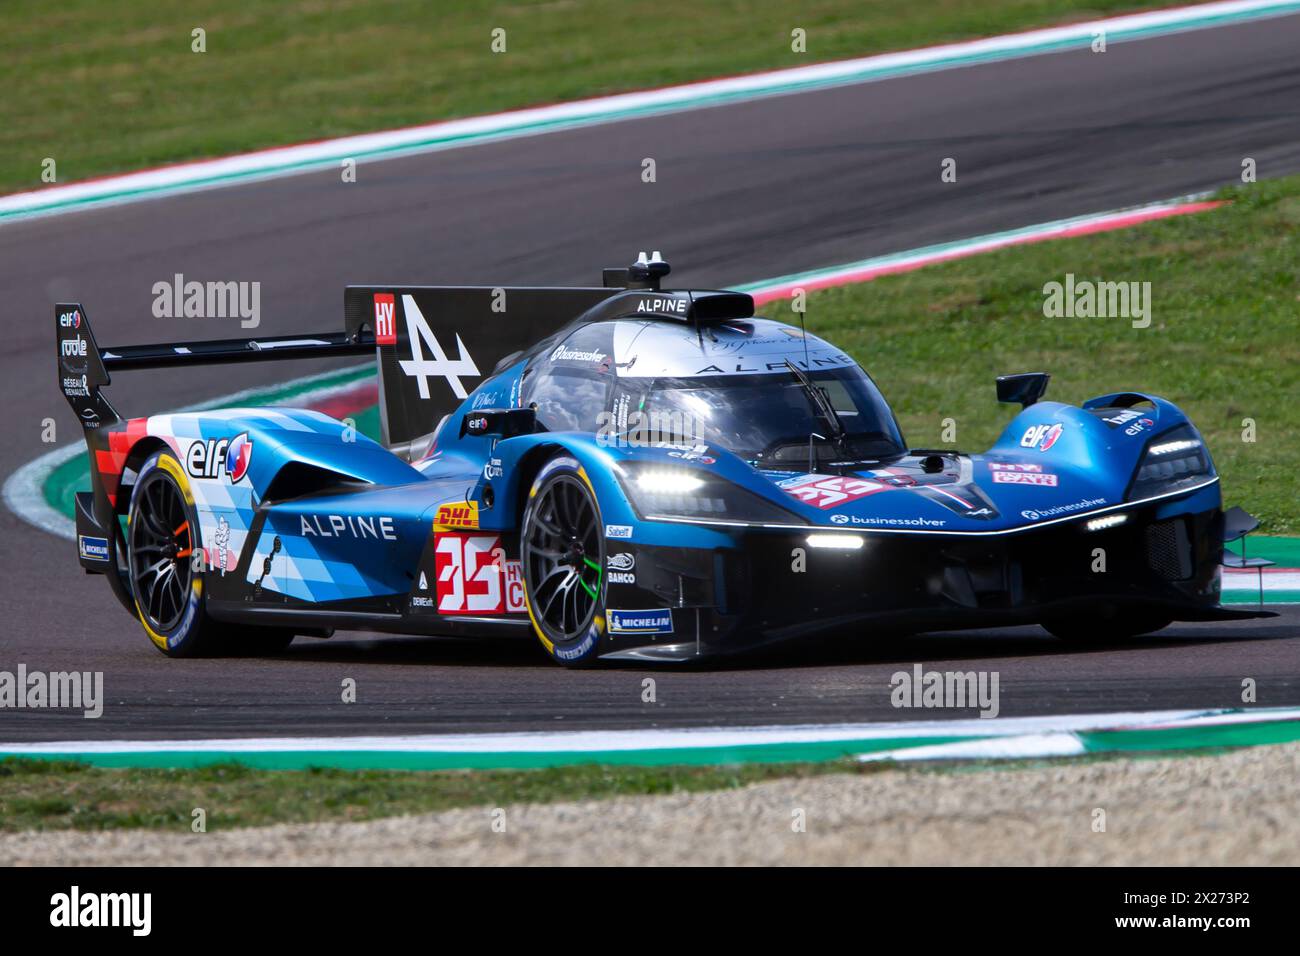 Imola, Italy. 20th Apr, 2024. ALPINE ENDURANCE TEAM (FRA), Alpine A424 - Paul-Loup Chatin (FRA), Ferdinand Habsburg-Lothringen (AUT), Charles Milesi (FRA) during the 6 Hours of Imola, 2nd round of the 2024 FIA World Endurance Championship, at International Circuit Enzo and Dino Ferrari, Imola, Italy on April 20, 2024 during WEC - 6 Hours of Imola Qualifying Race, Endurance race in Imola, Italy, April 20 2024 Credit: Independent Photo Agency/Alamy Live News Stock Photo